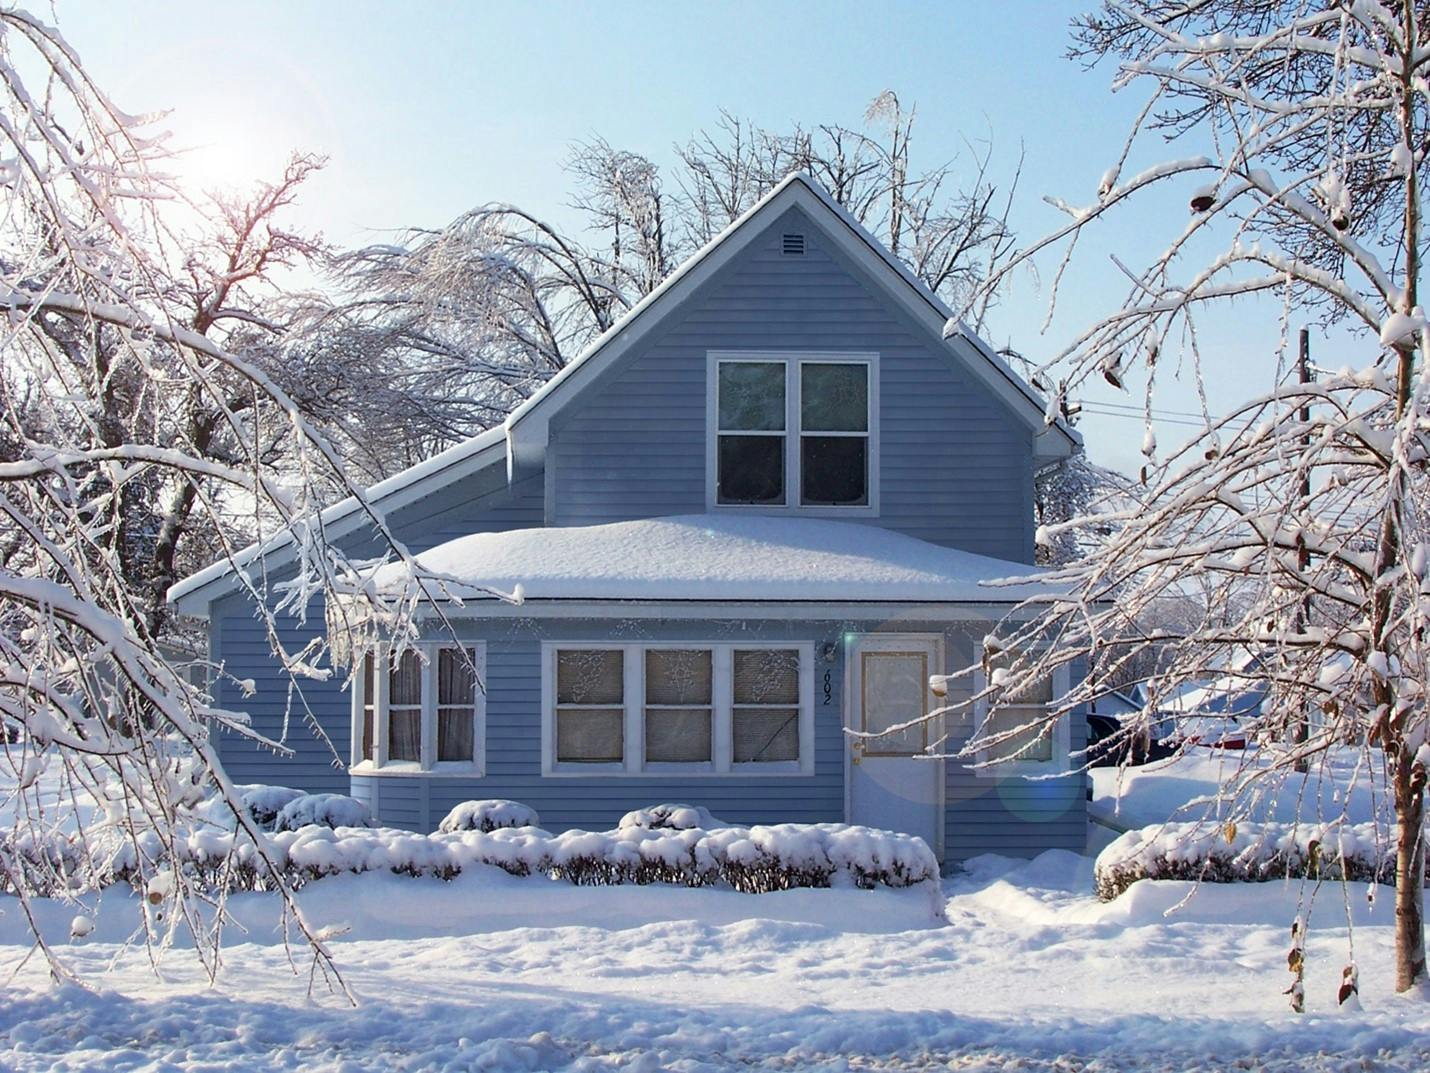 Snow covered house with blue James Hardie Siding